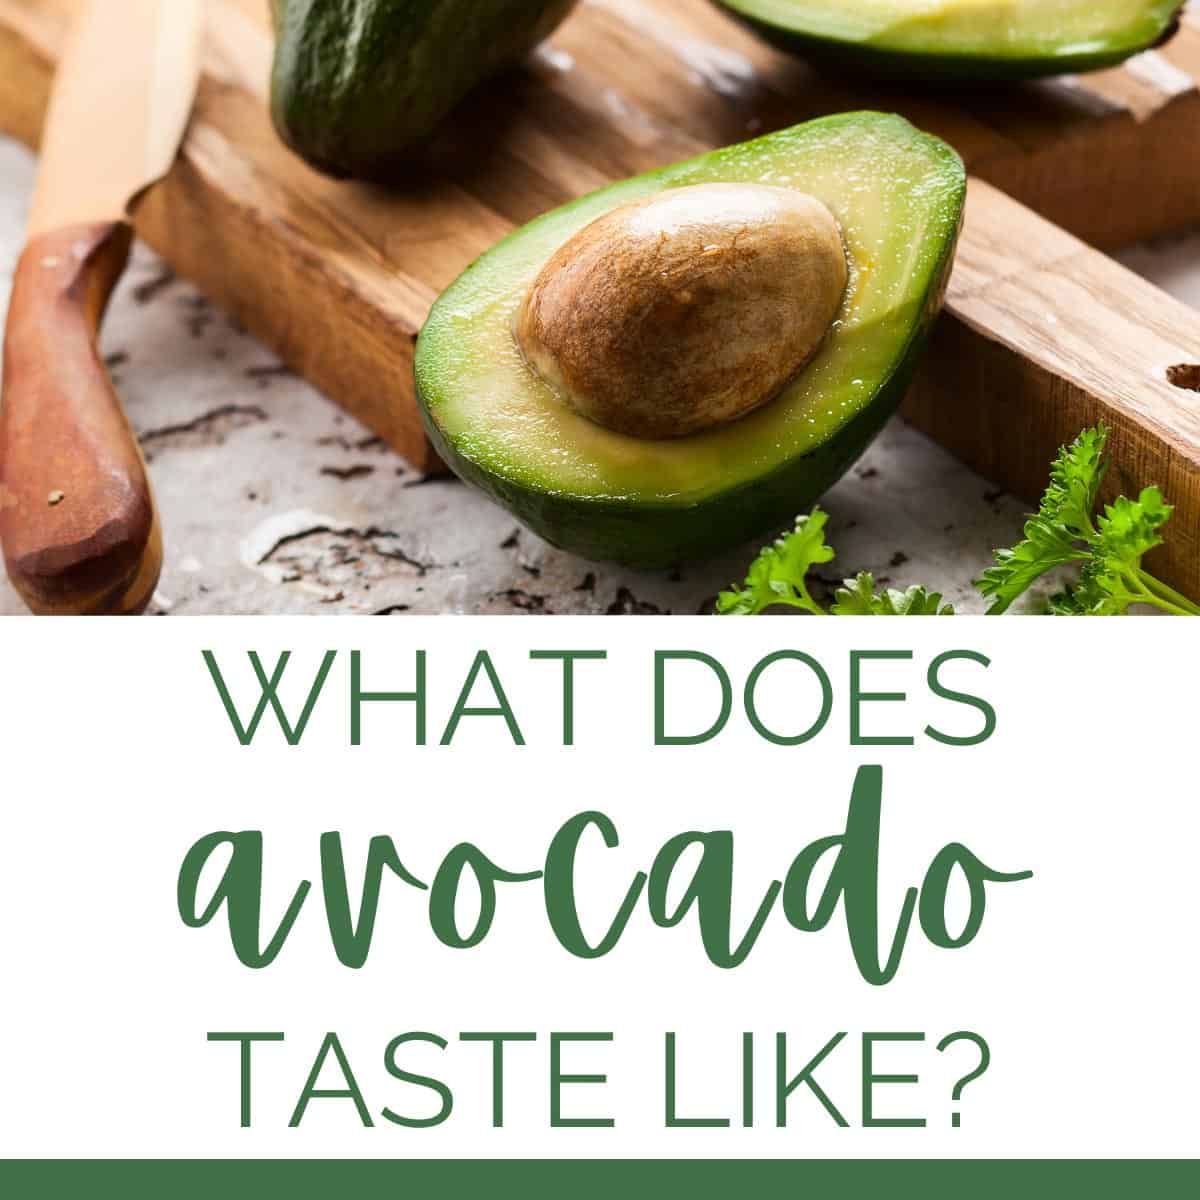 Top half of graphic shows avocados and avocado halves on a brown cutting board, bottom half of graphic has text in green.